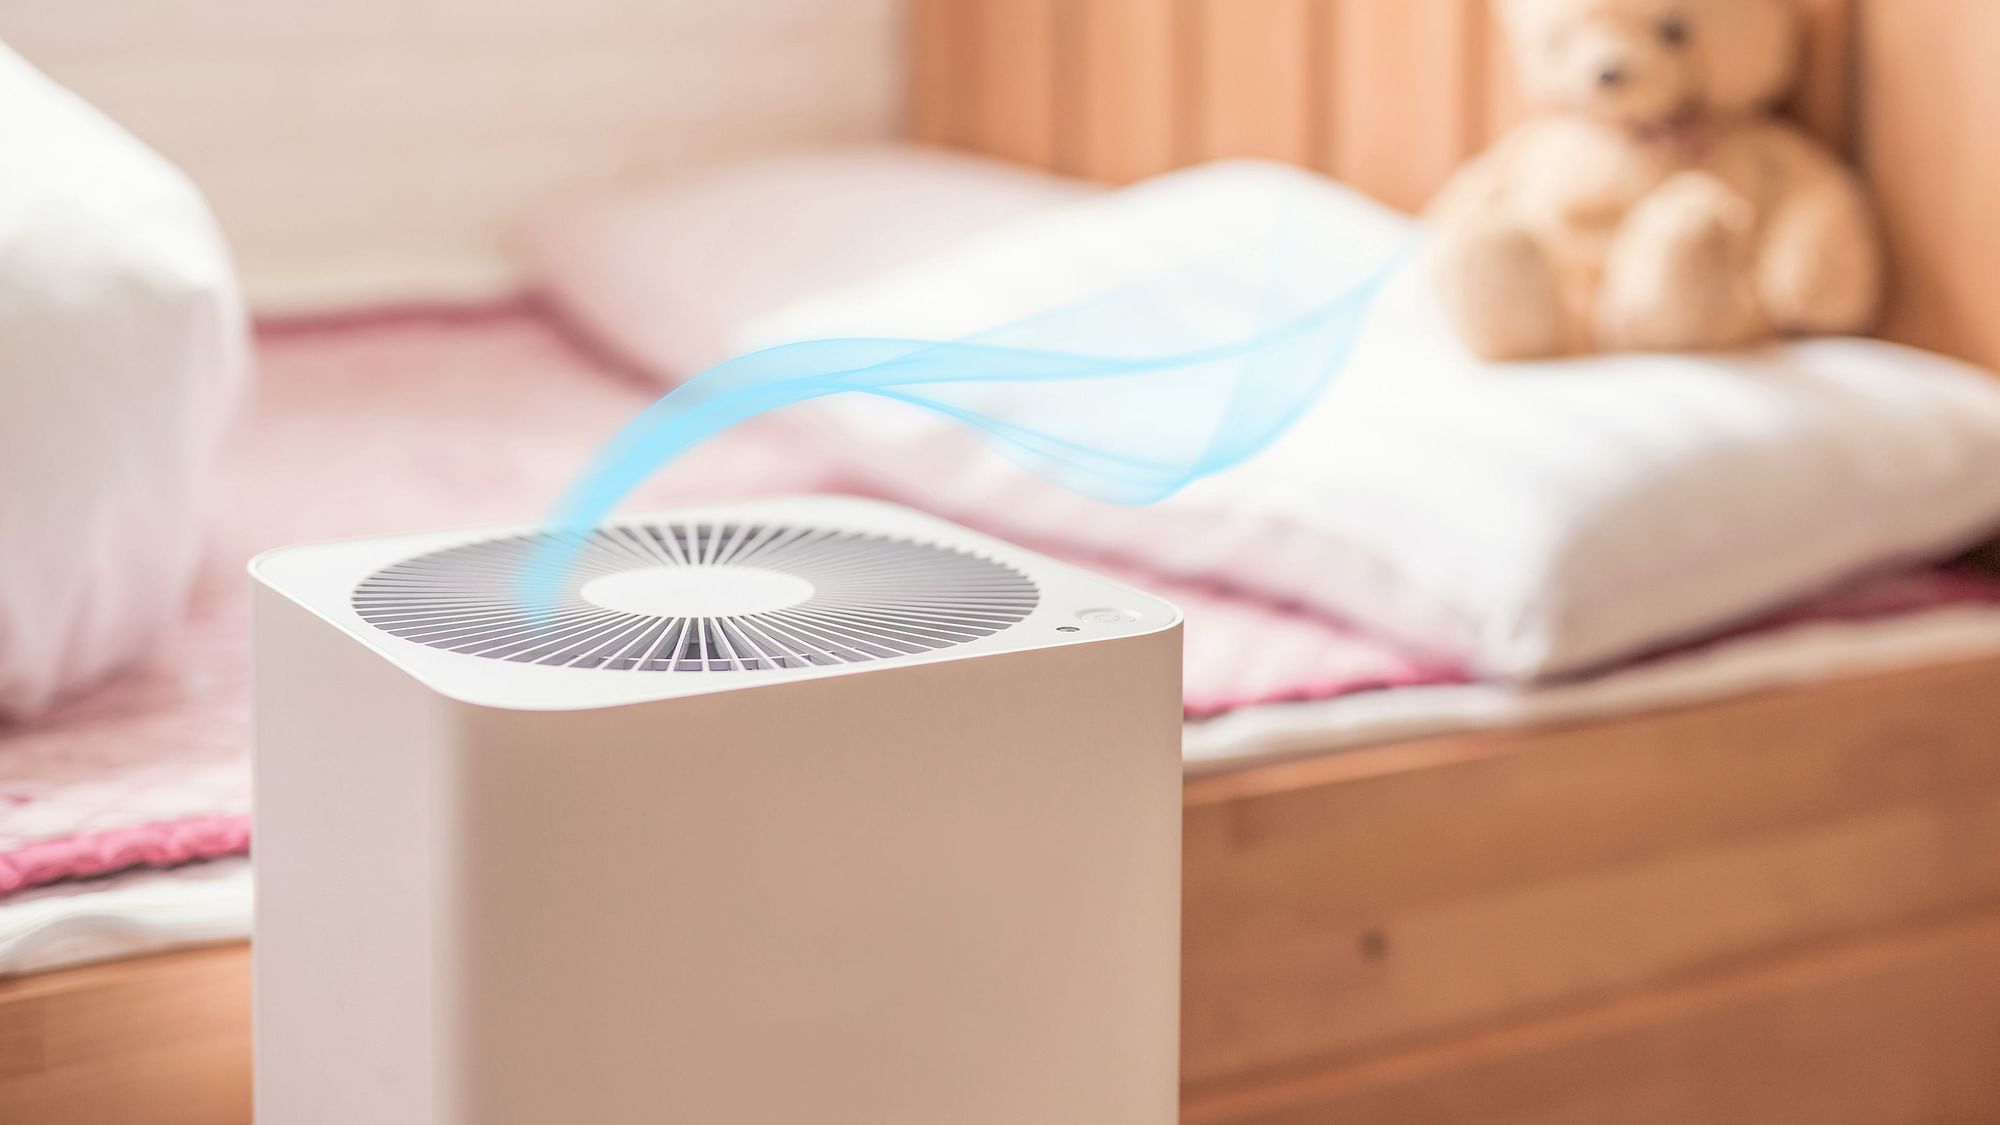 The aim of air purifiers is to provide clean air and mitigate the harmful effects of air pollution.&nbsp;